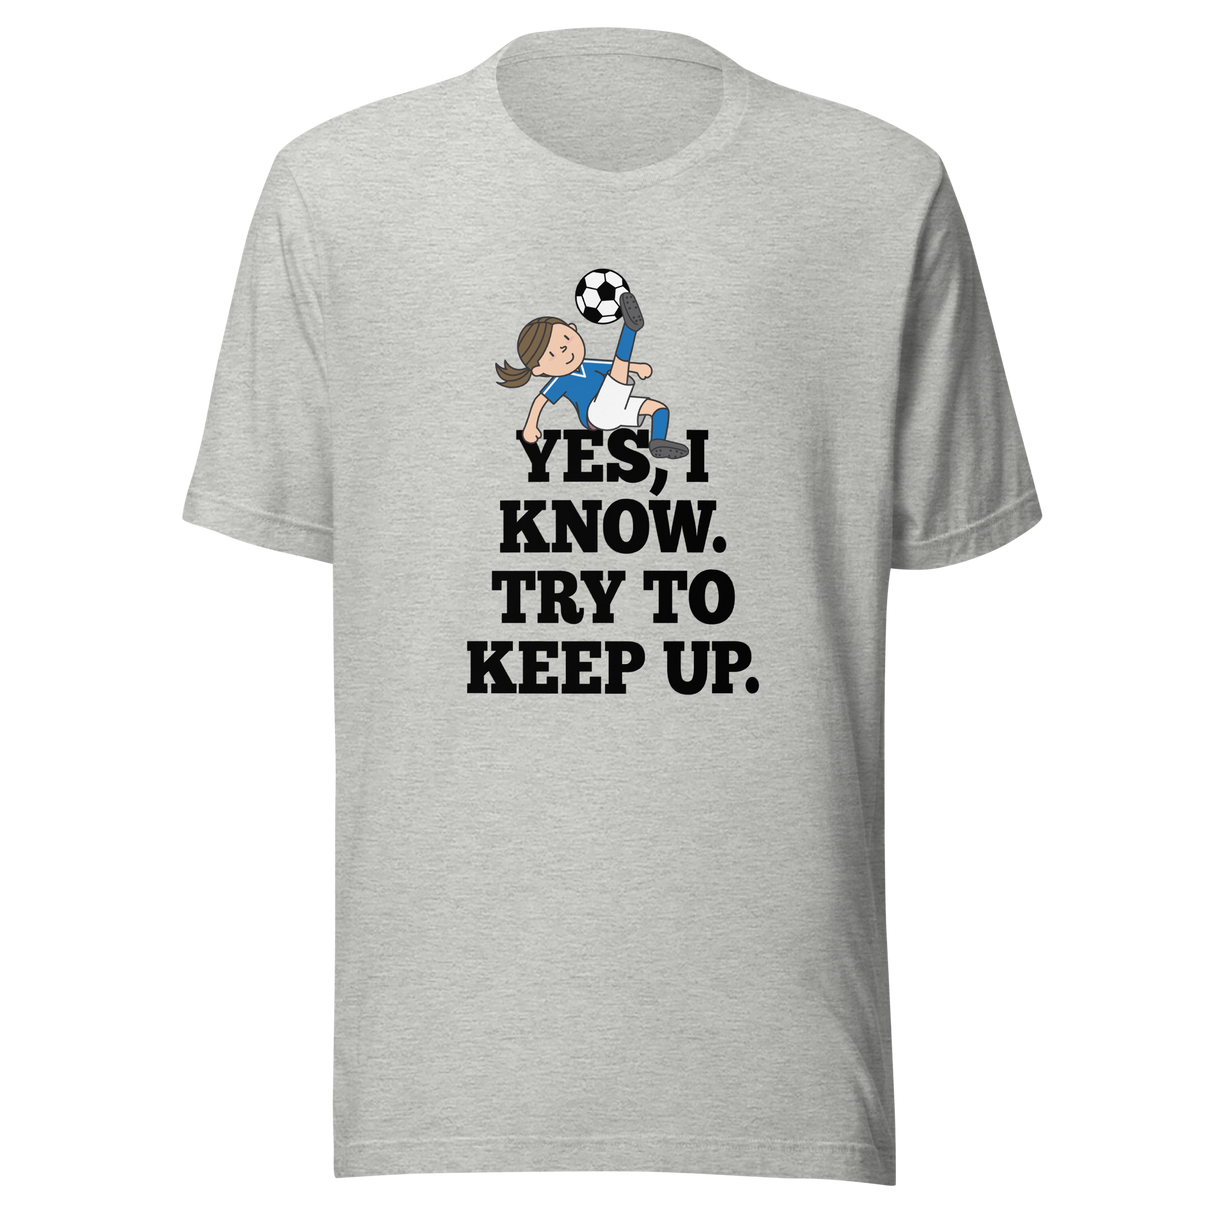 yes-i-know-try-to-keep-up-girls-tee-soccer-t-shirt-womens-tee-sports-t-shirt-soccer-tee#color_athletic-heather